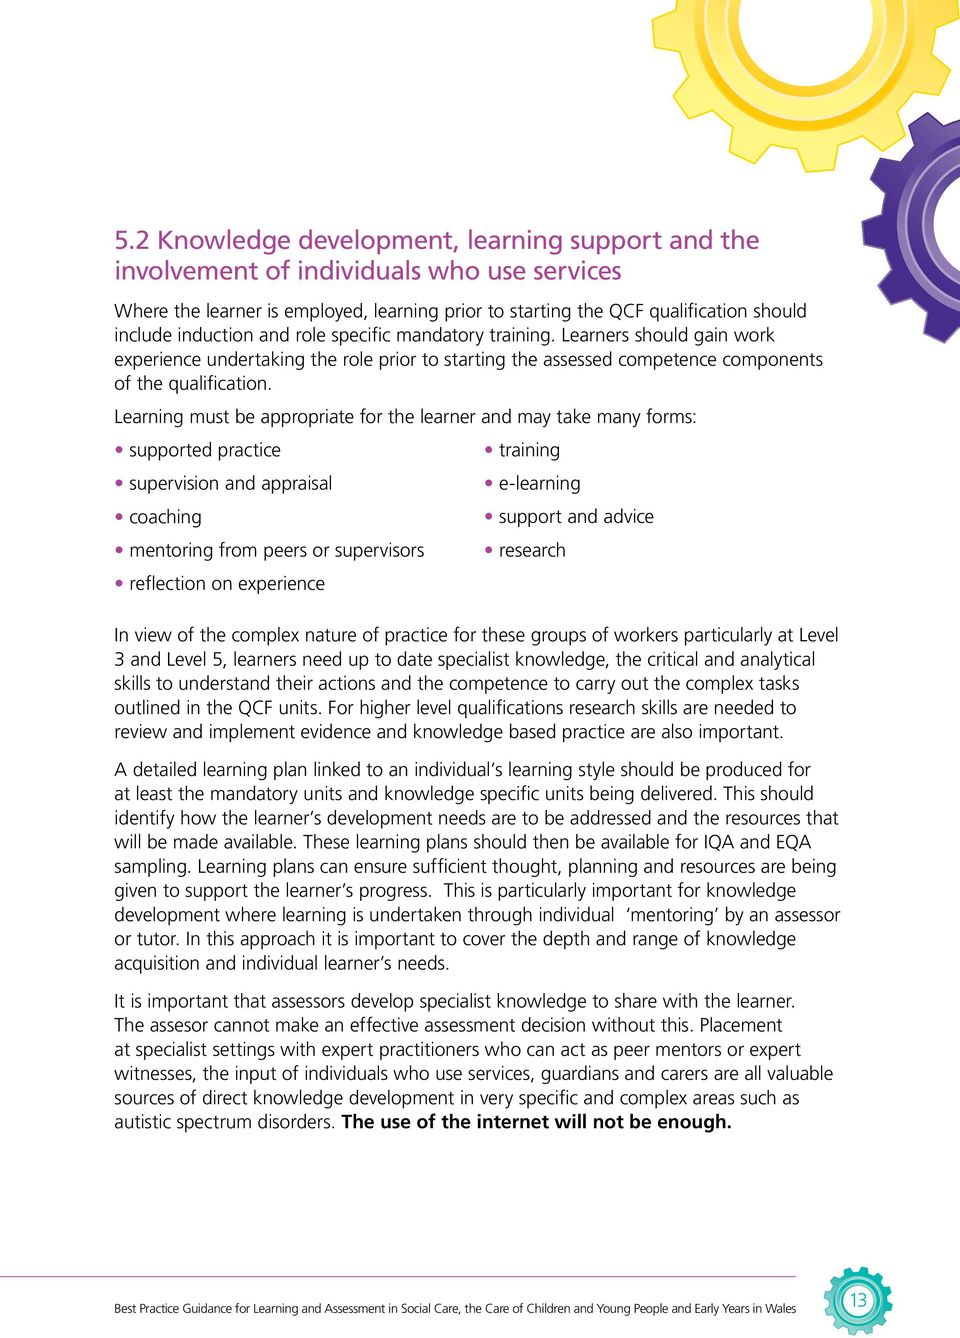 Learning must be appropriate for the learner and may take many forms: supported practice training supervision and appraisal e-learning coaching support and advice mentoring from peers or supervisors